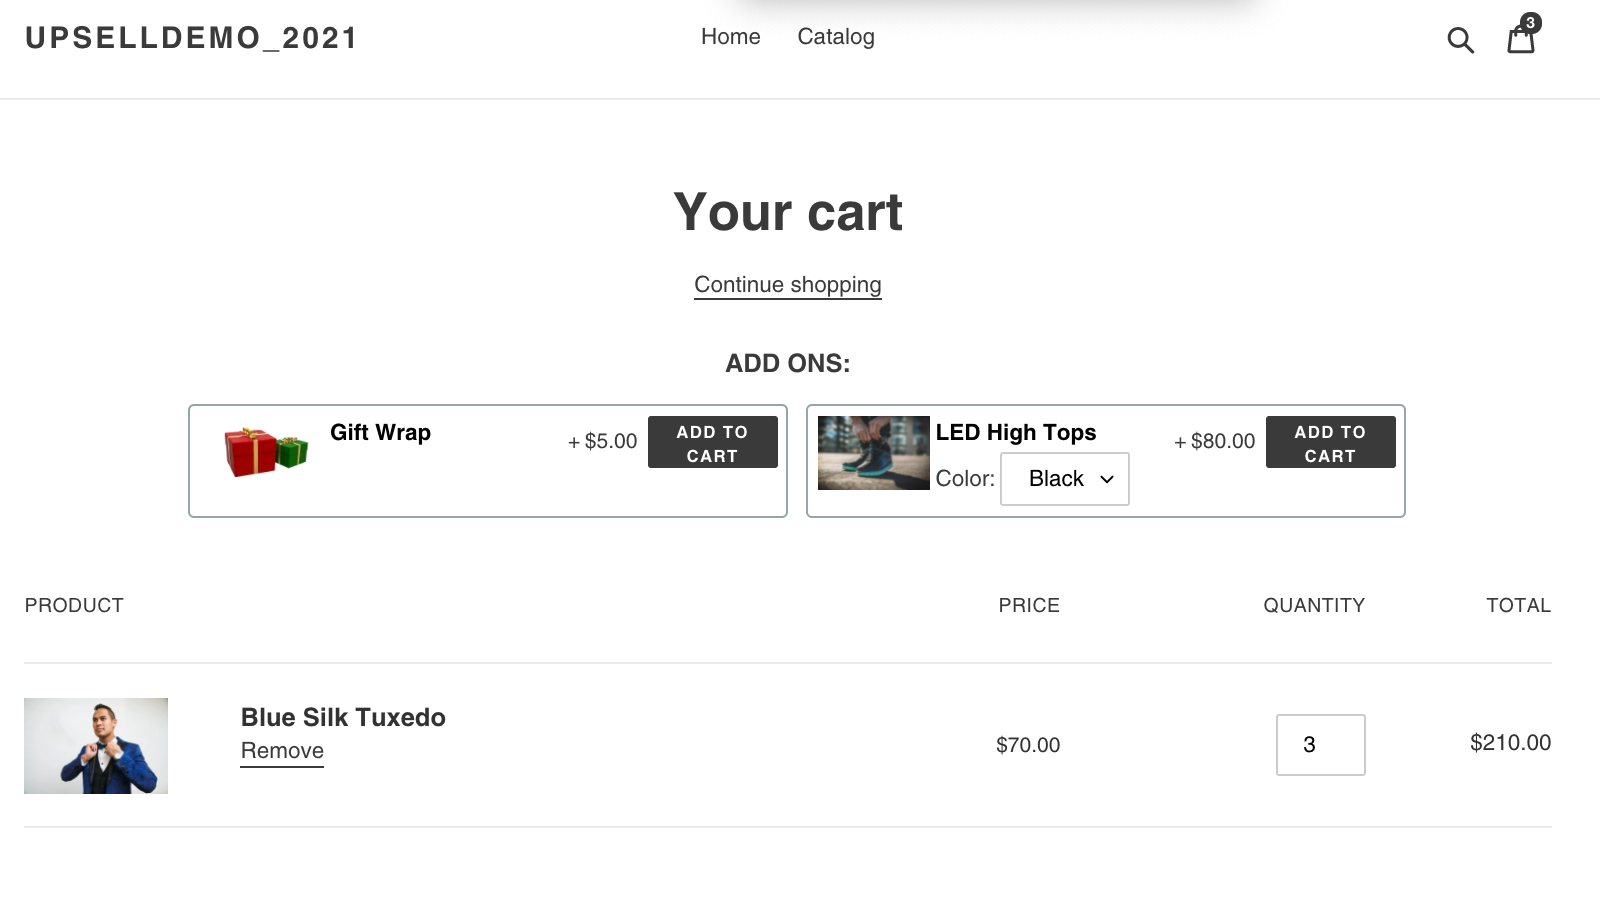 Upsell in the cart with add-ons